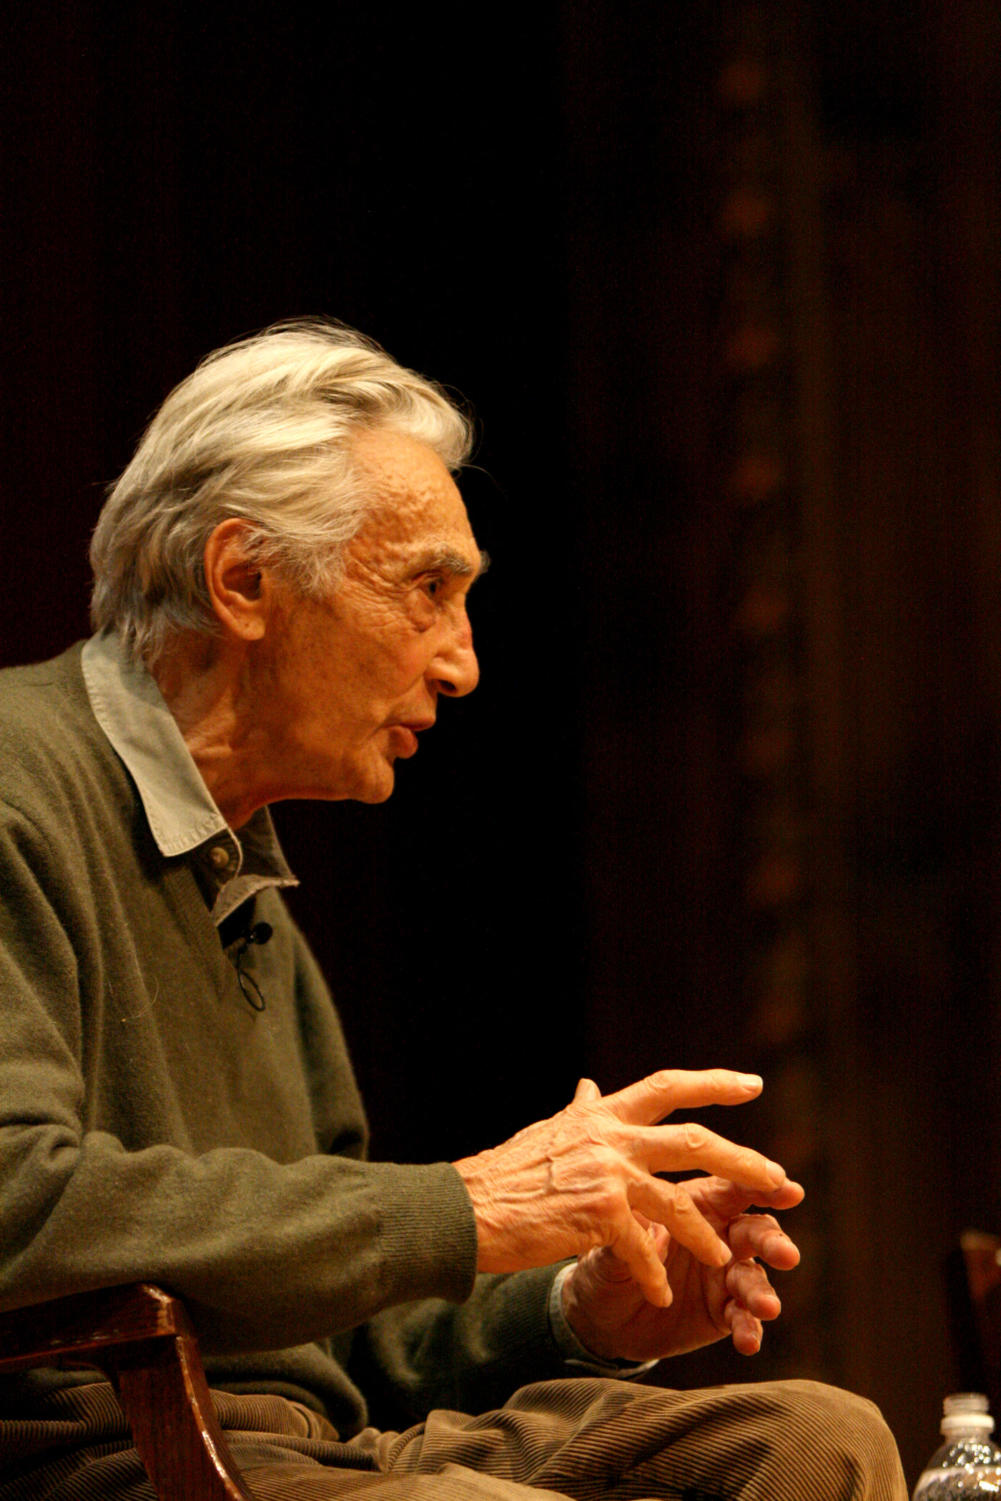 Historian Howard Zinn discussed war, imprisonment, government, and the death penalty in Mandel Hall last Saturday. The event was held by The Campaign to End the Death Penalty.